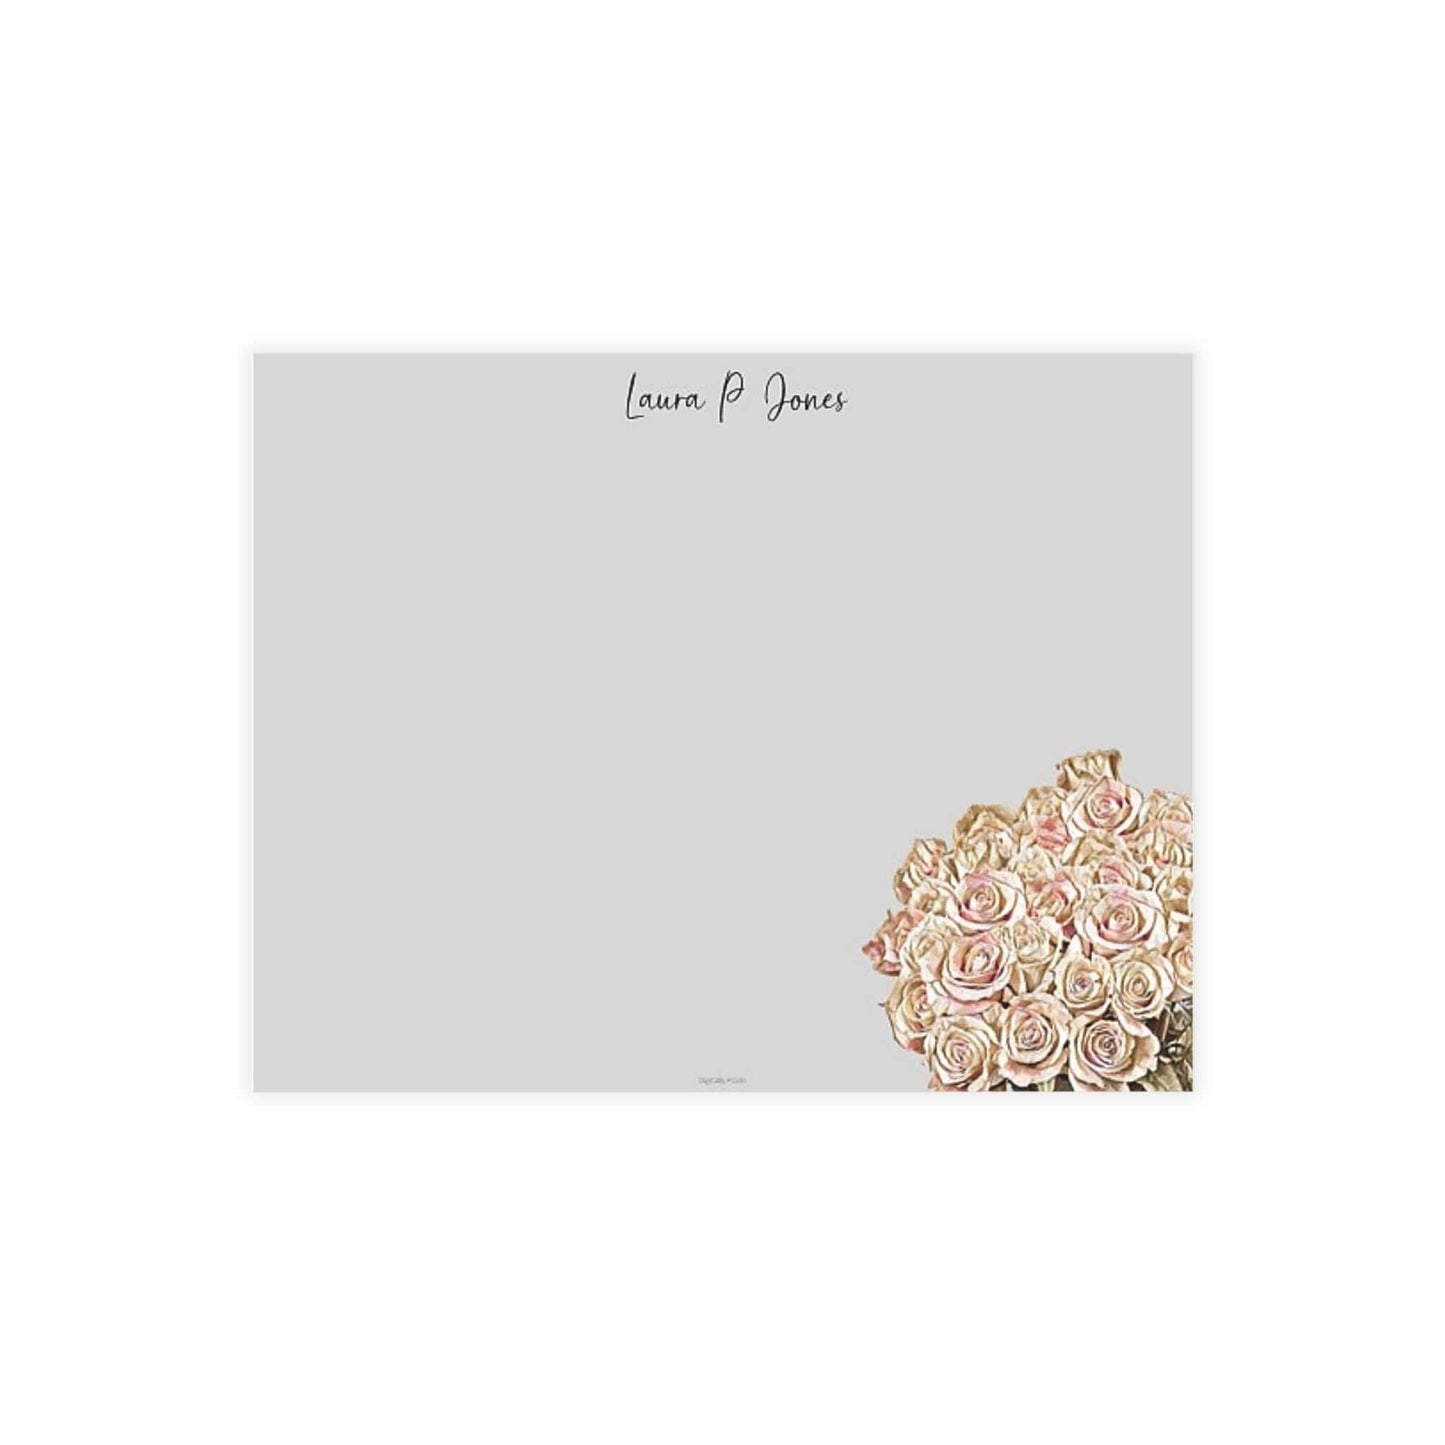 Personalized Note Card: Add a Personal Touch with Customized Stationery for Every Occasion. Bouquet Notecard Bundles (envelopes included)